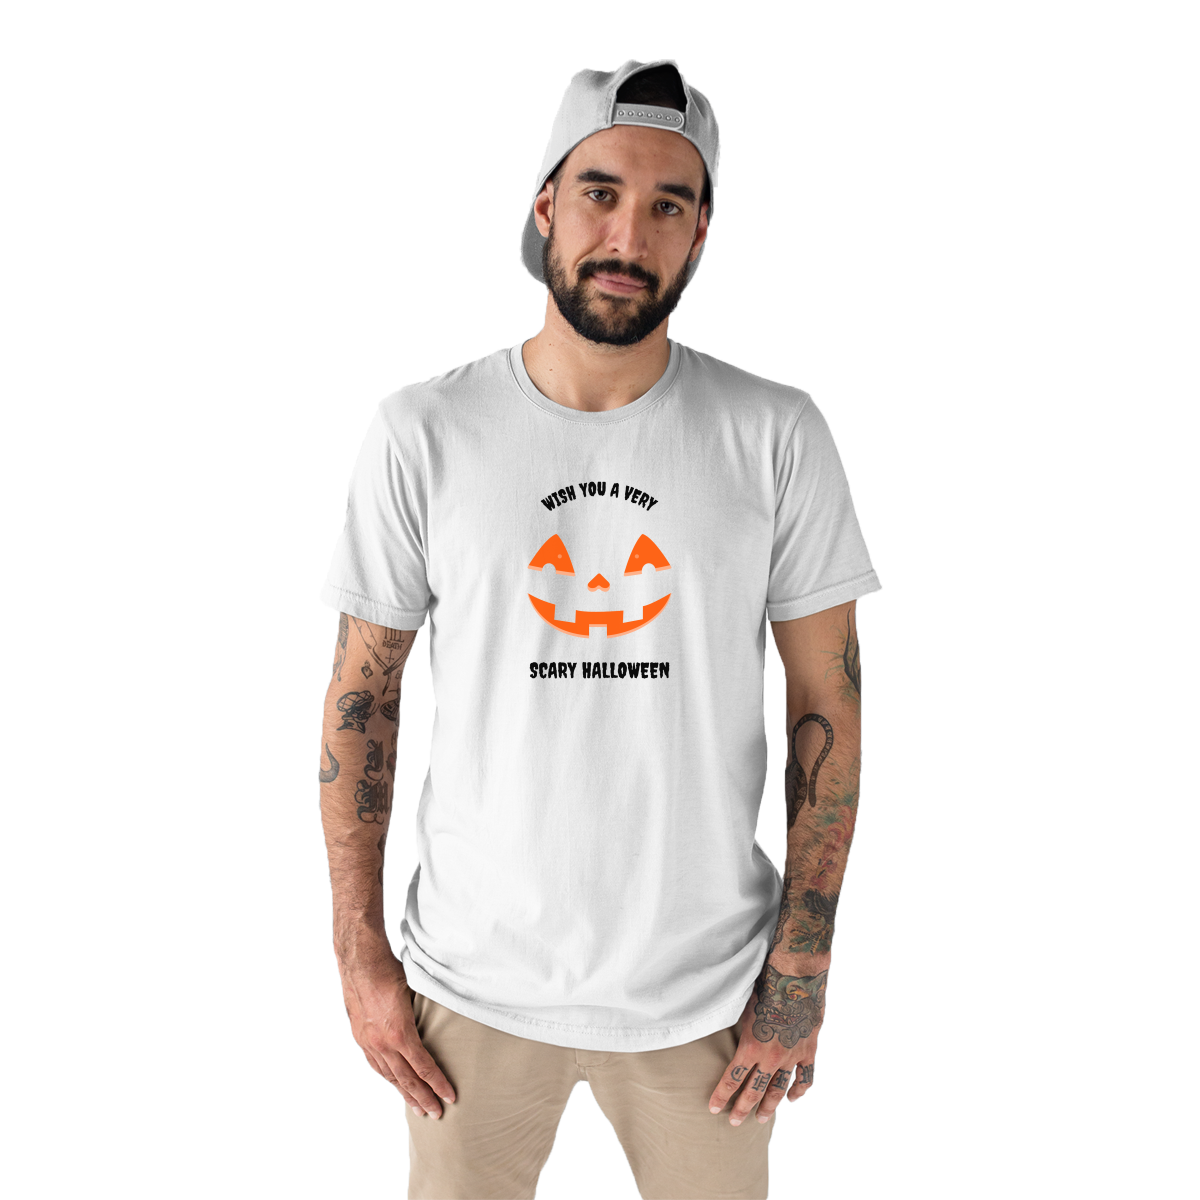 Wish You a Very Scary Halloween Men's T-shirt | White